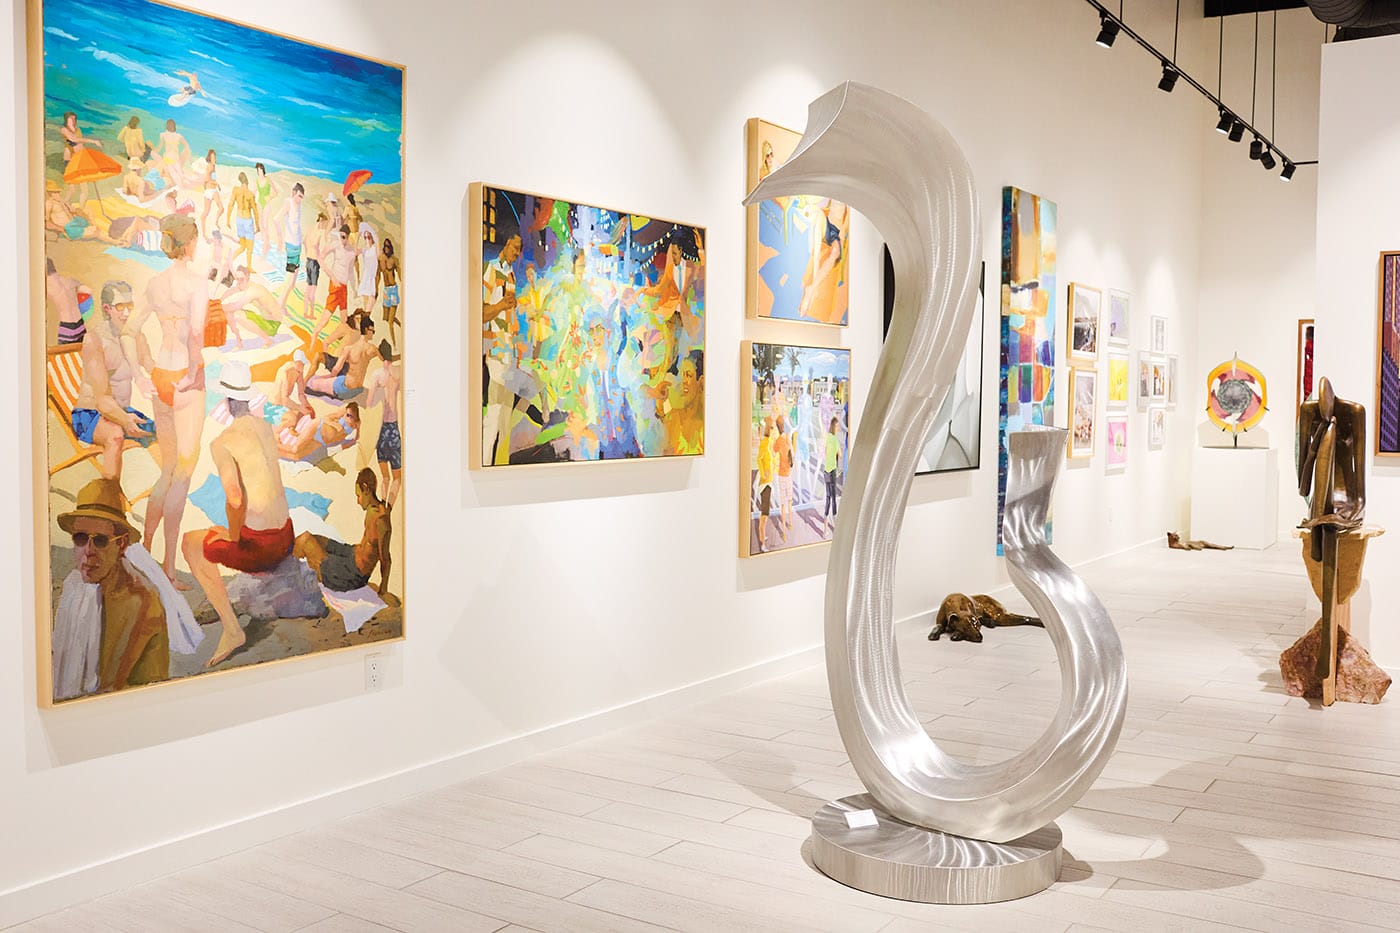 From left: Four paintings by Michael Steirnagle; stainless sculpture by Kevin Robb; tall abstract painting by Anthony Liggins; bronze dog and cat sculptures by Silvia Davis; glass shield sculpture by Davide Salvadore; and bronze girl reading sculpture by John Kennedy. All at Coda Gallery.